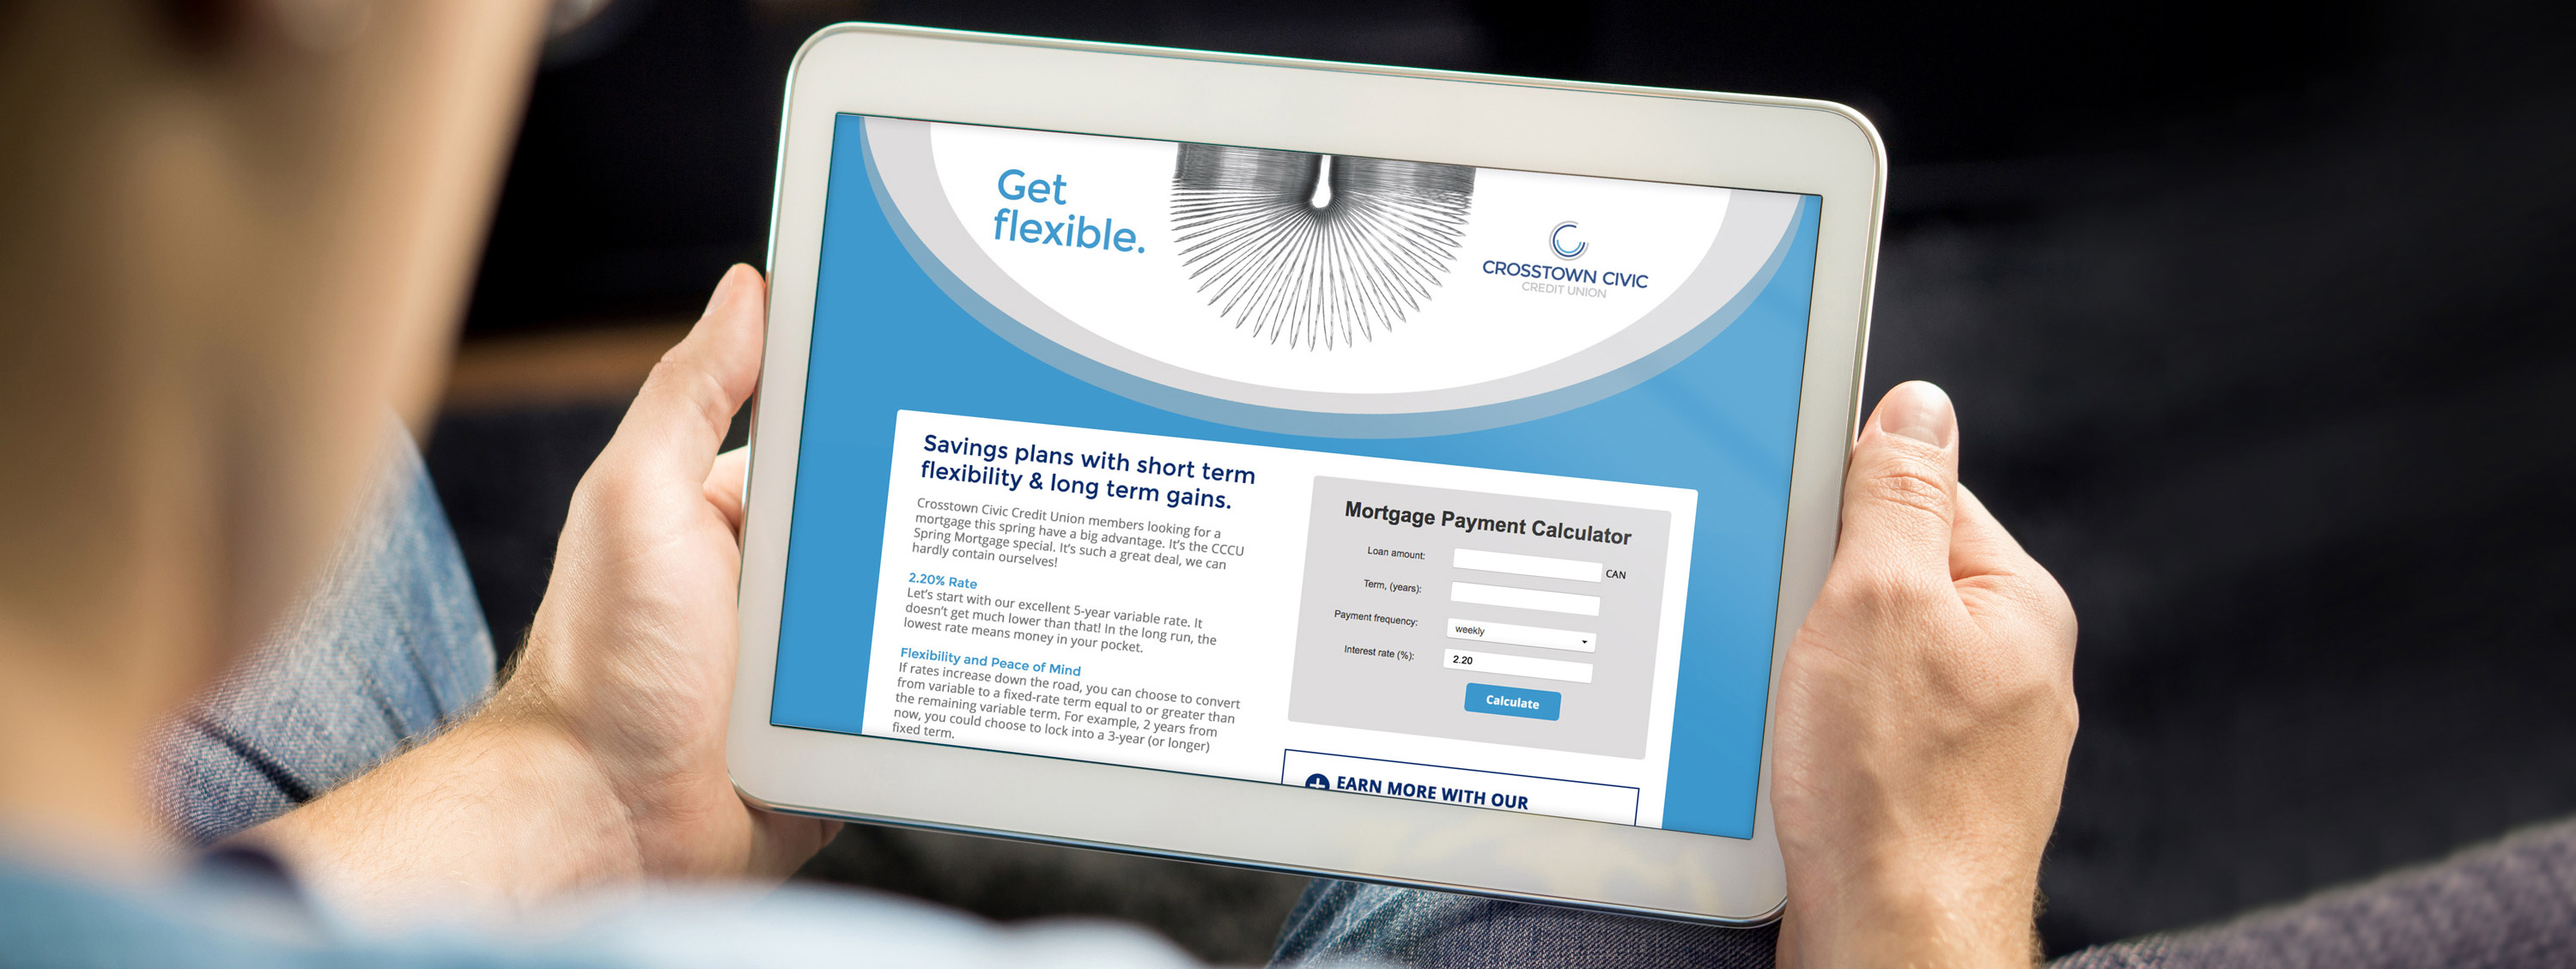 Crosstown Civic Credit Union online marketing campaign landing page designed by 6P Marketing